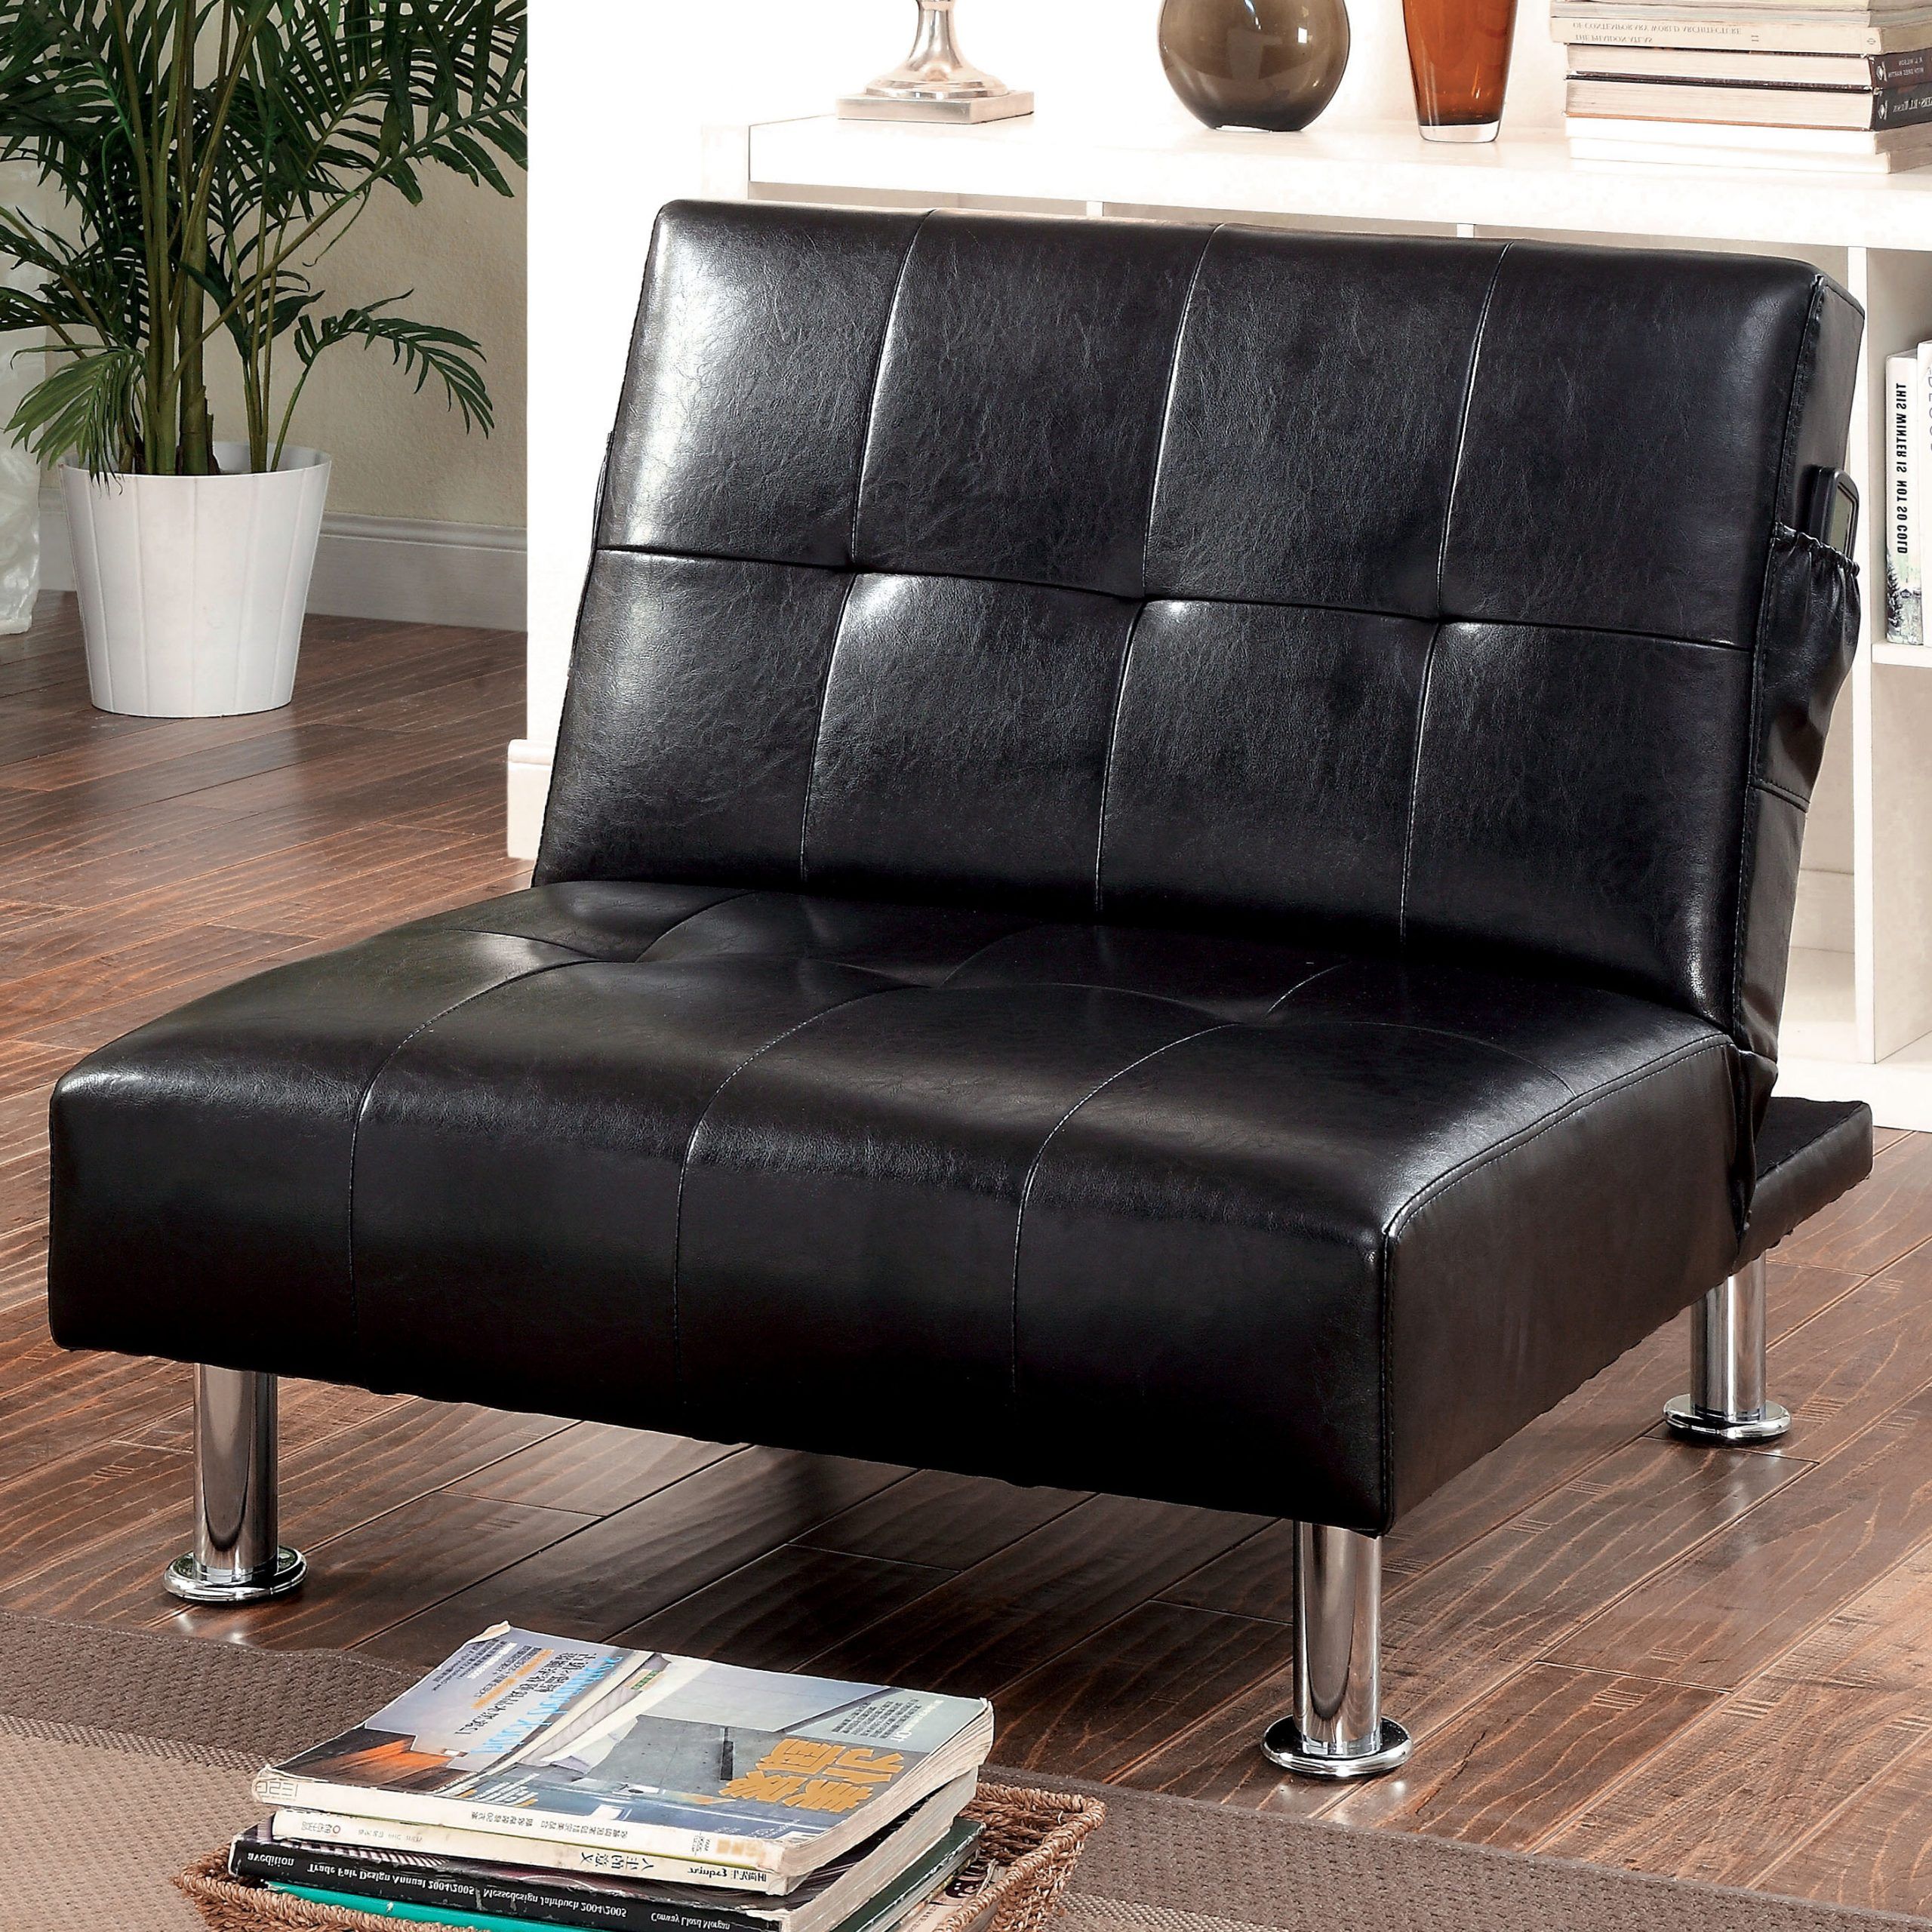 Trendy Perz Tufted Faux Leather Convertible Chairs In Perz  (View 1 of 20)